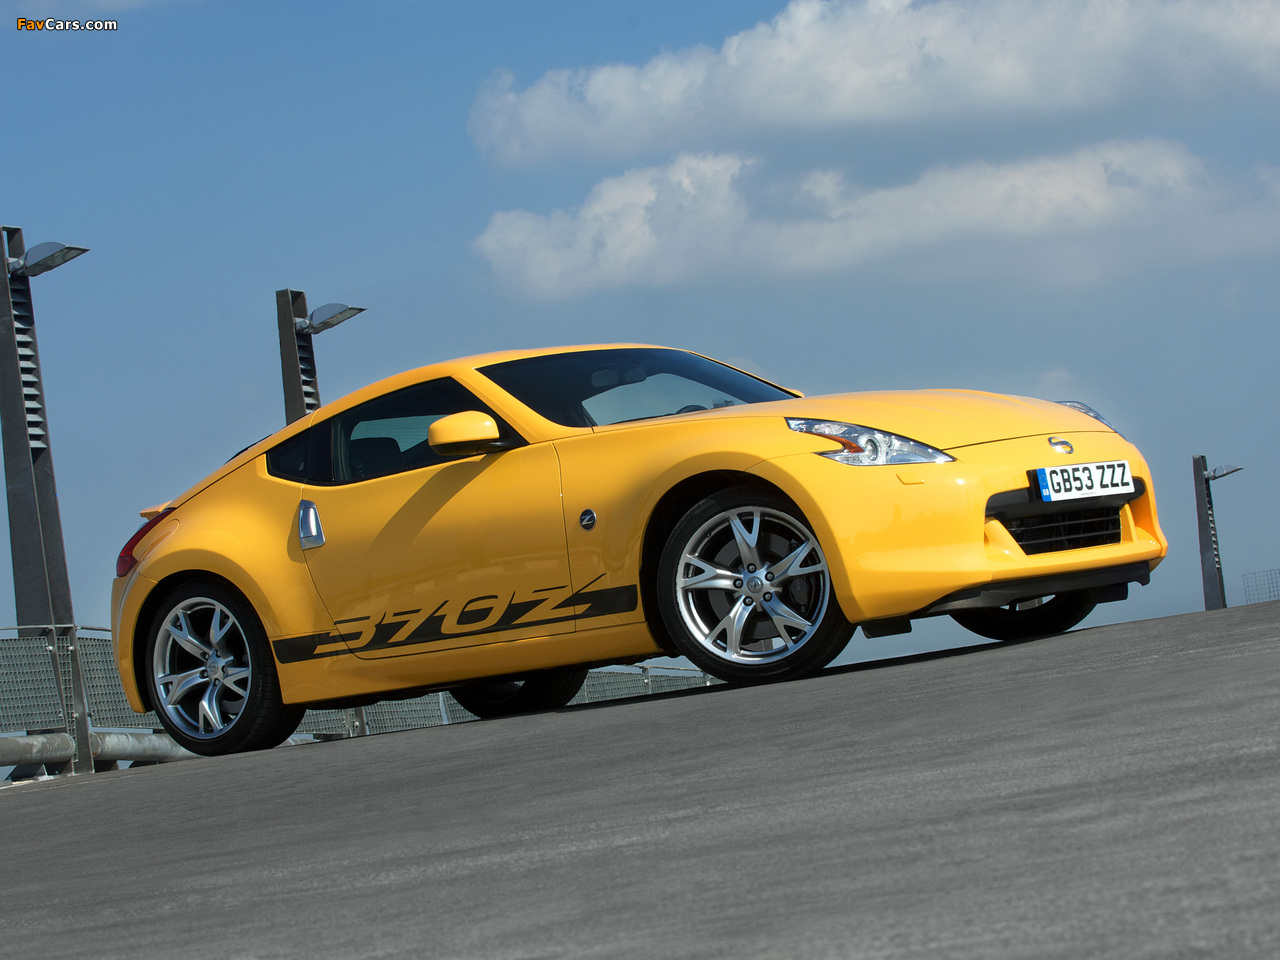 Nissan 370Z Yellow 2009 pictures (1280 x 960)